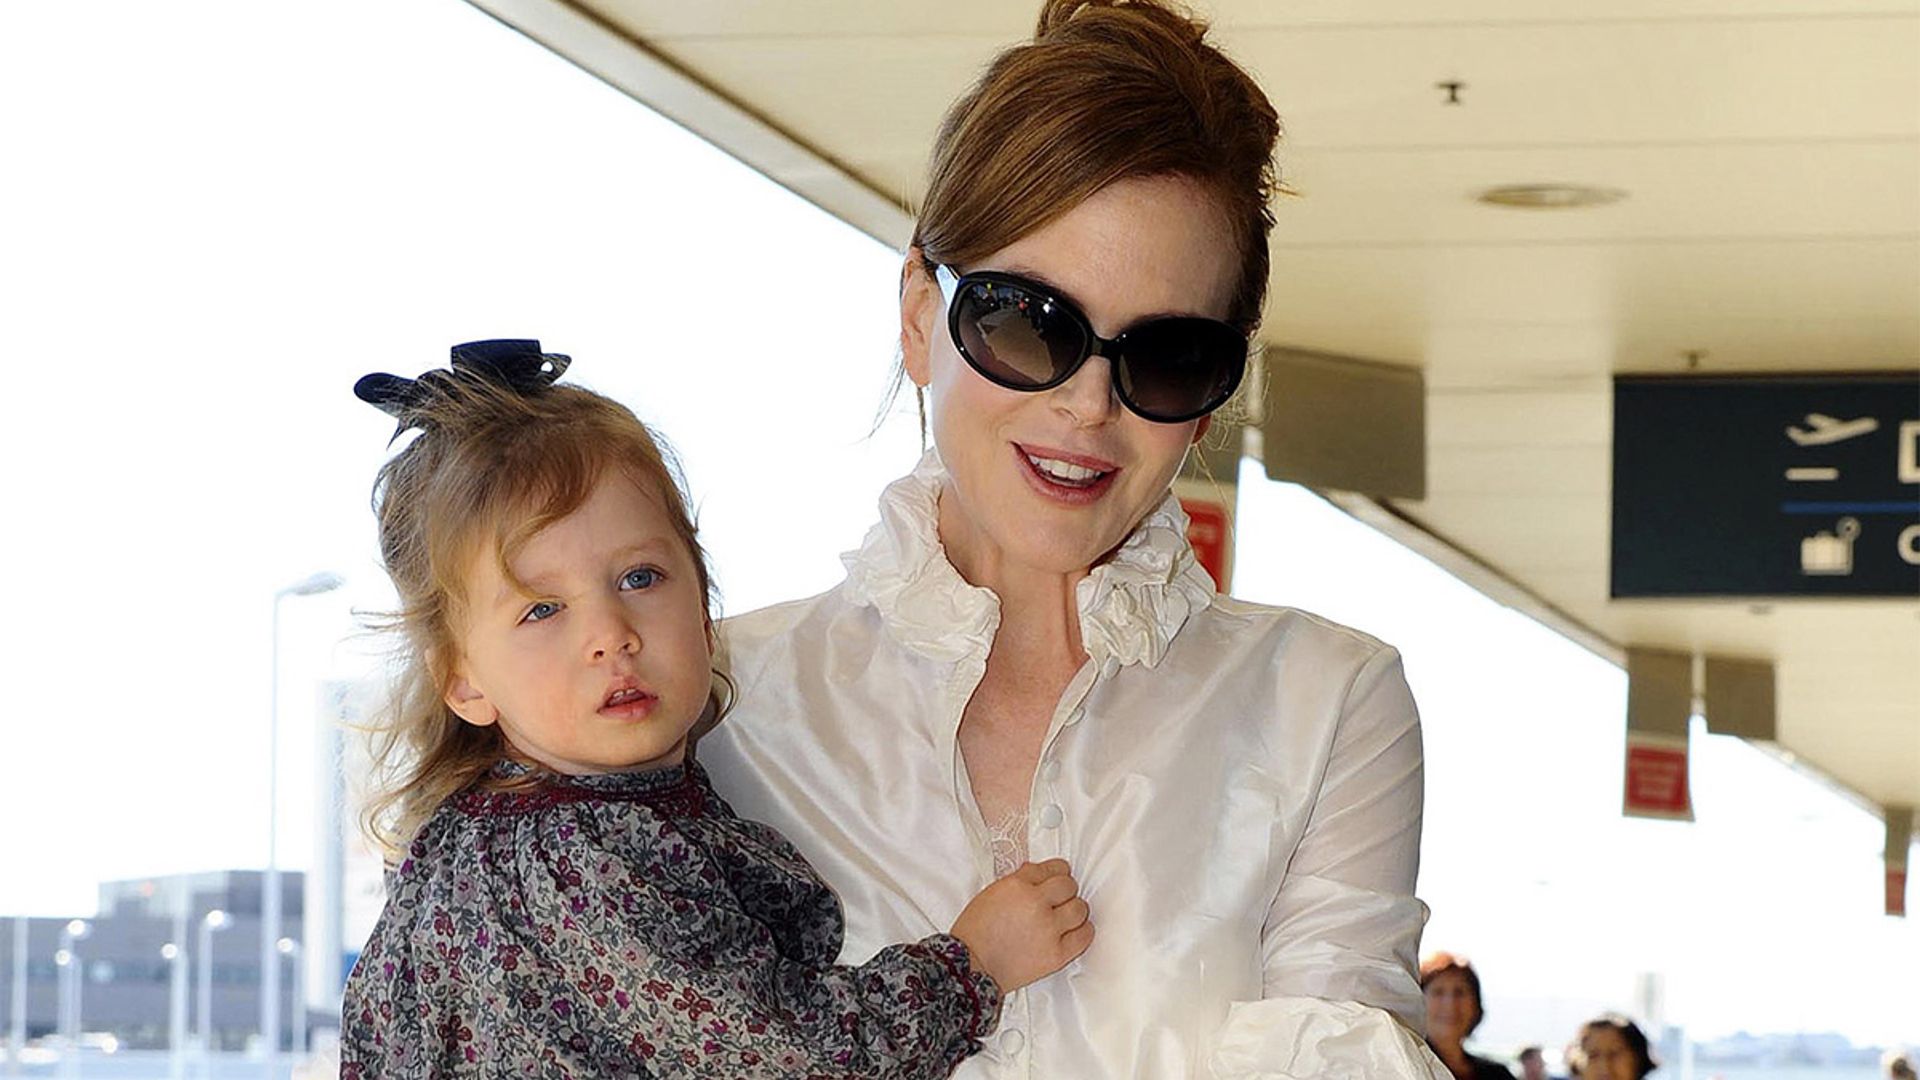 nicole-kidman-and-daughter-at-airport